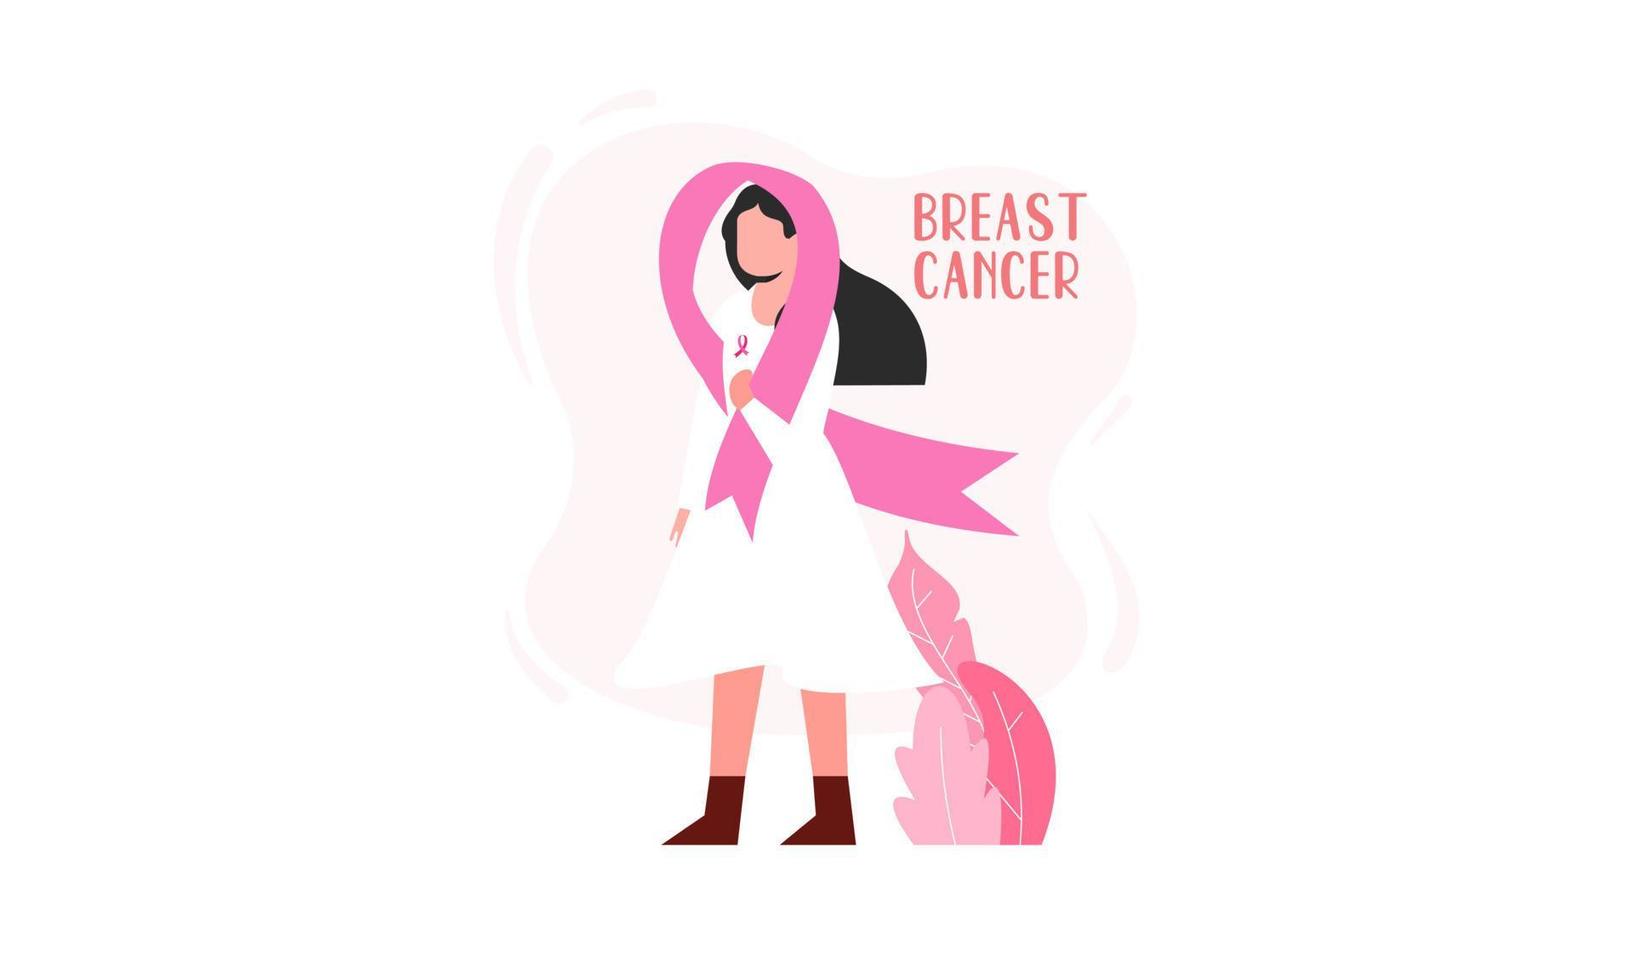 Breast cancer awareness with ribbon and illustration logo vector